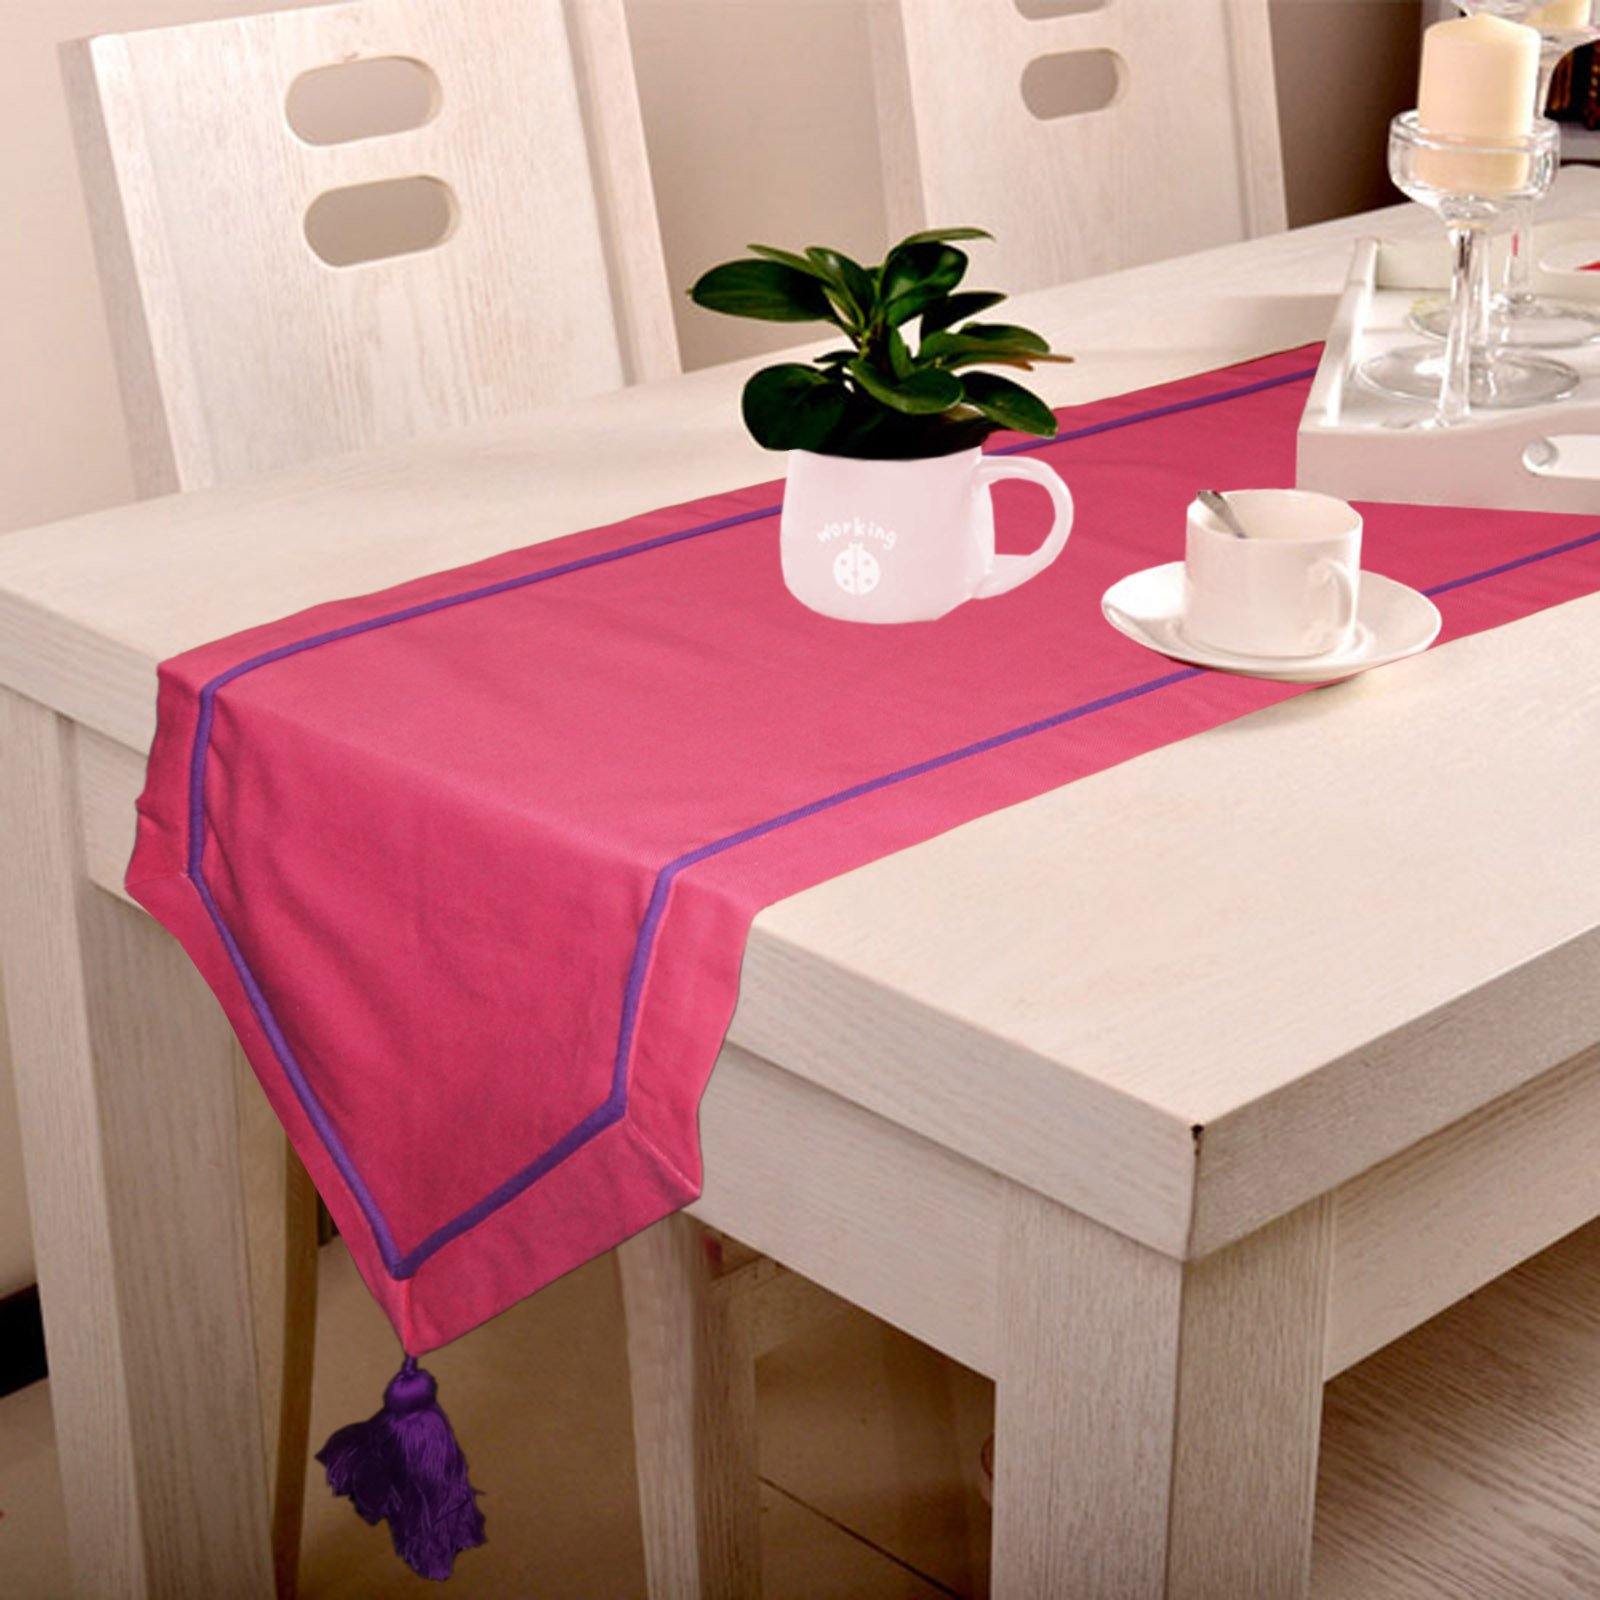 Lushomes Pink Table Runner with Purple contrasting cord piping - Lushomes